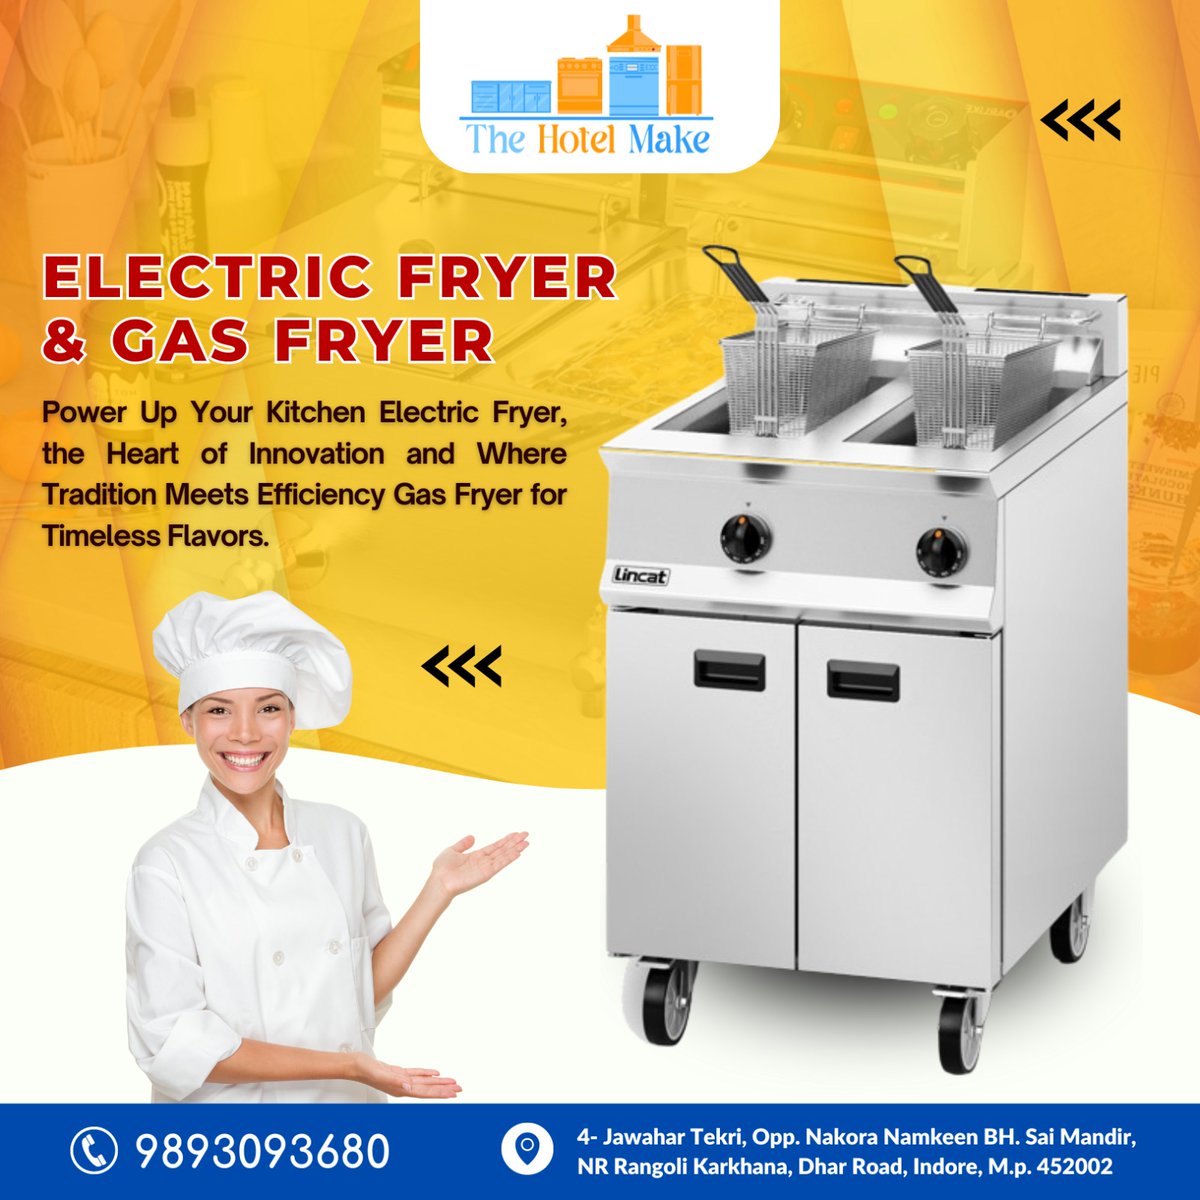 Experience culinary innovation at The Hotel with our electric and gas fryers.
#FryerMagic #CulinaryExcellence #ElectricFryer #GasFryer
.
.
#FryerMagic #CulinaryExcellence #ElectricFryer #GasFryer #FoodieDelight #KitchenInnovation #ChefLife #TasteTheDifference #GourmetDelights